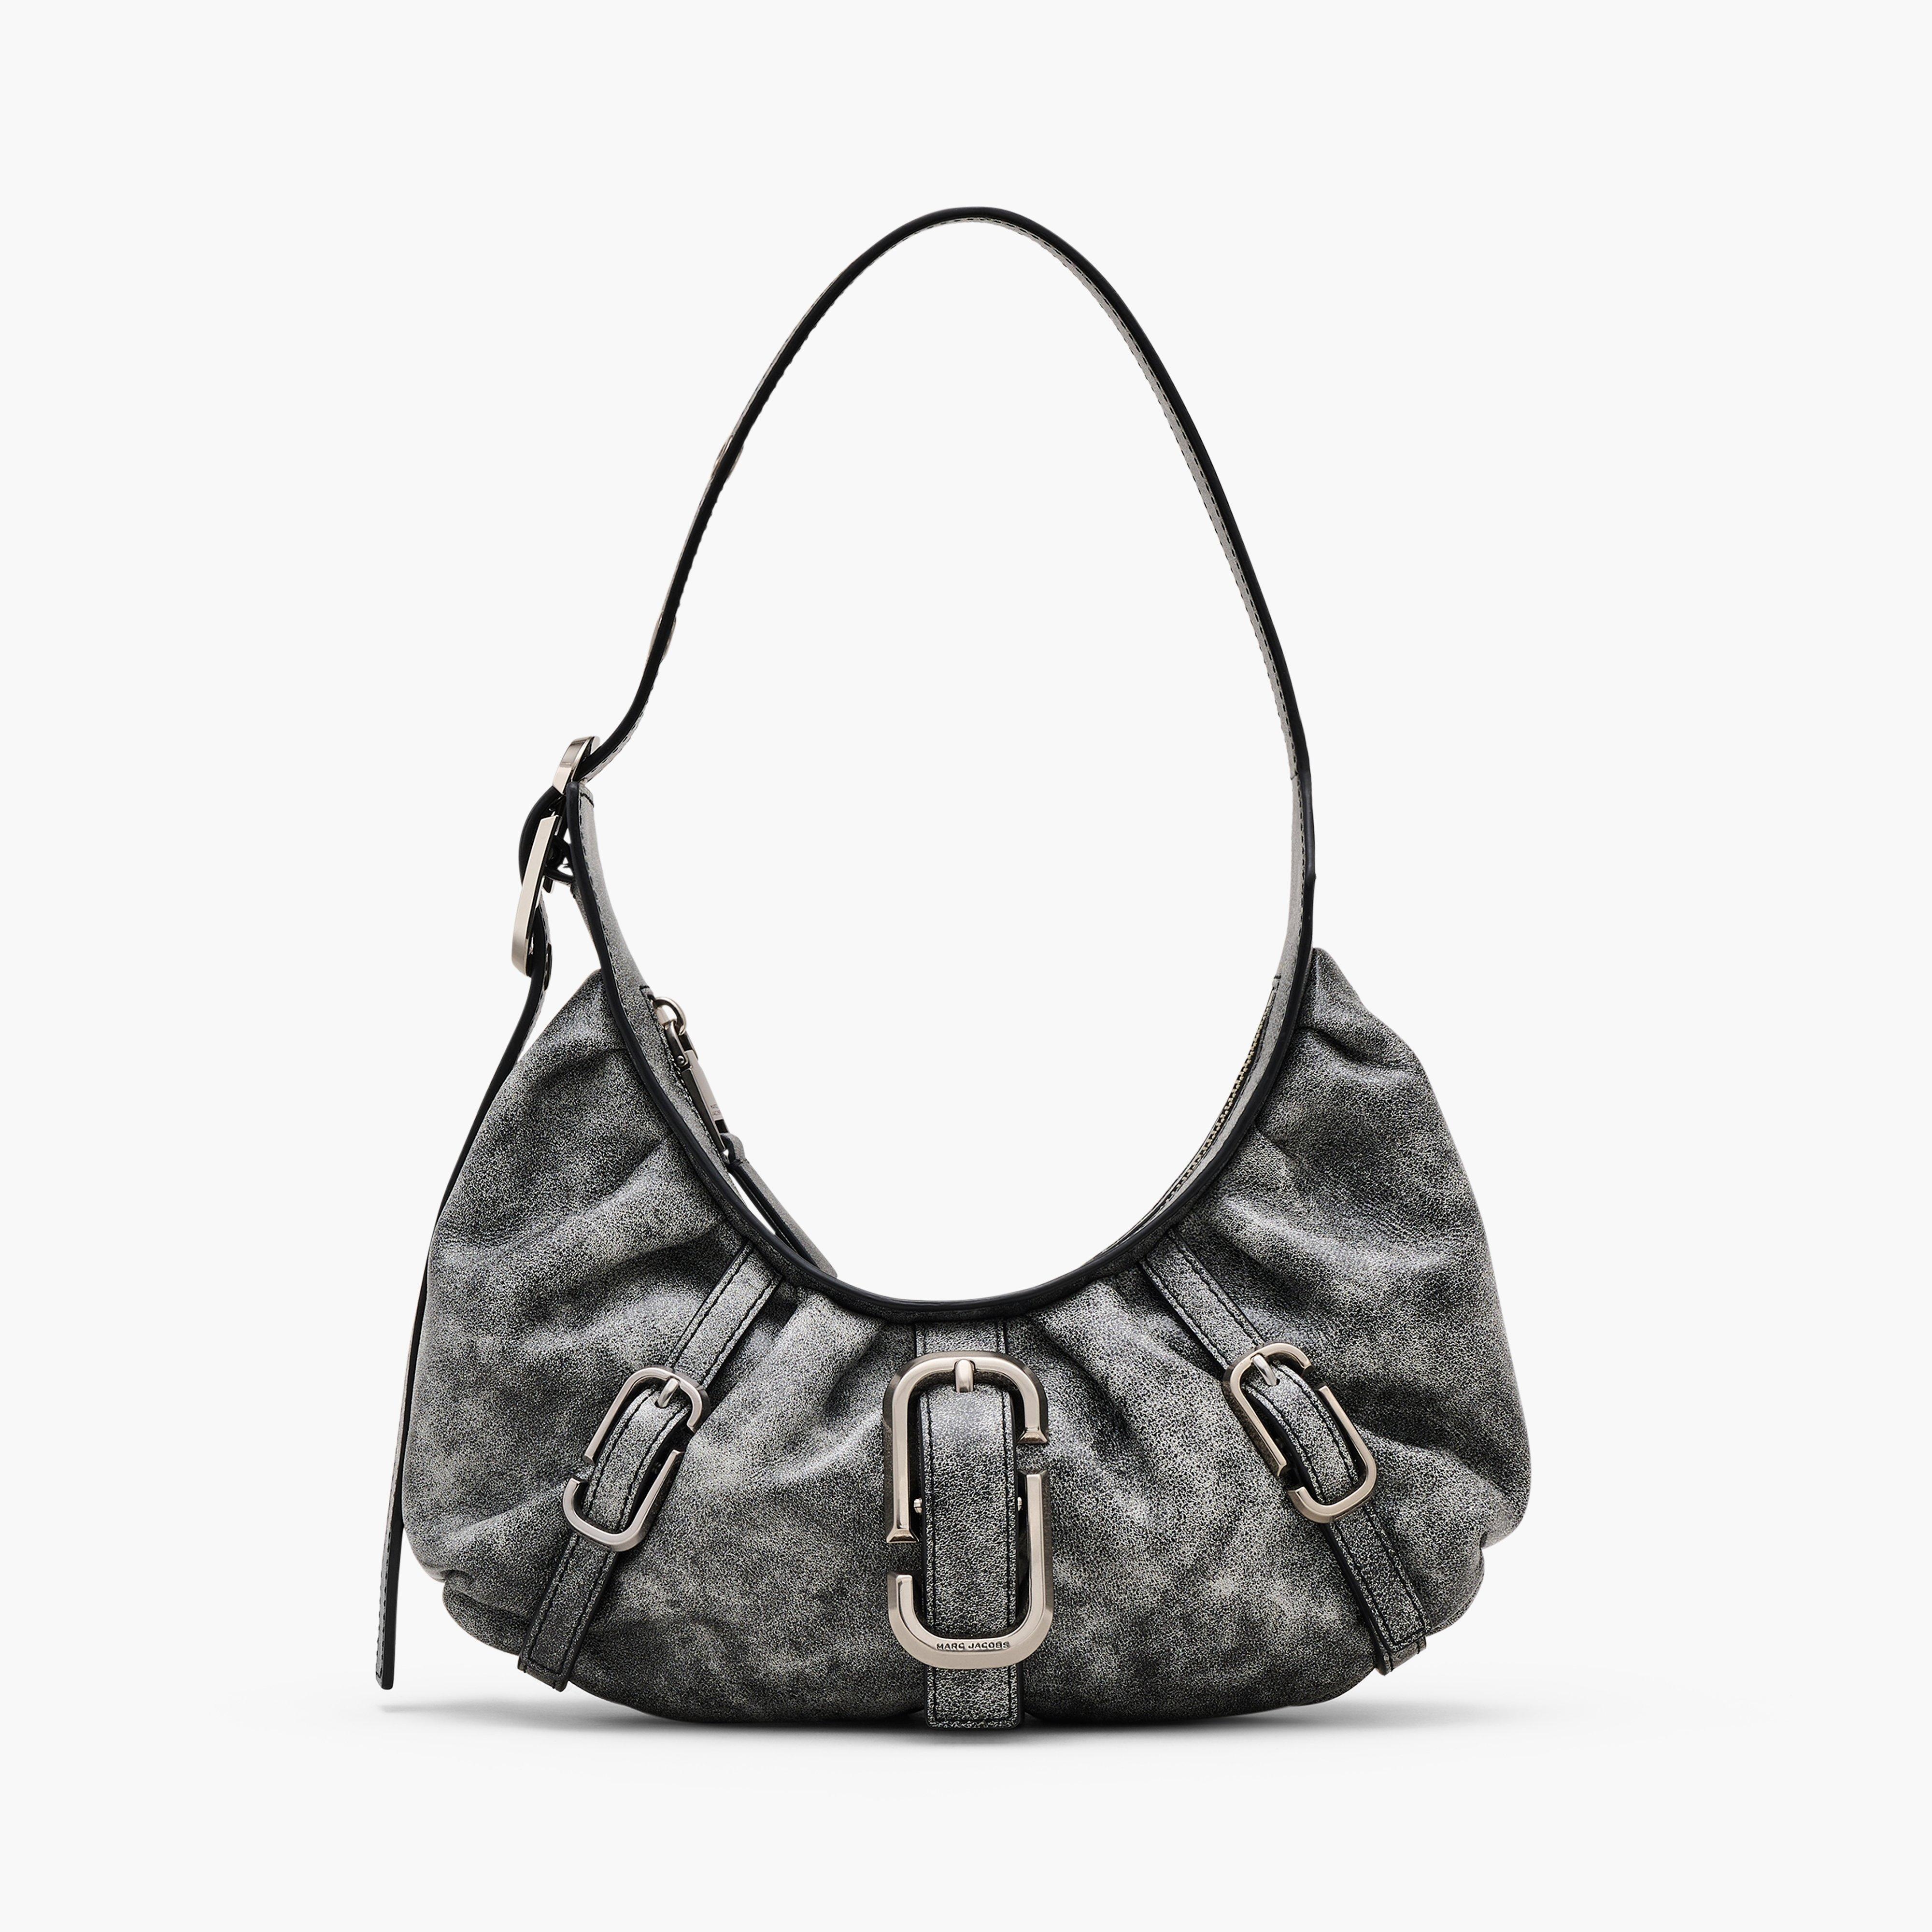 THE DISTRESSED LEATHER BUCKLE J MARC CRESCENT BAG - 1